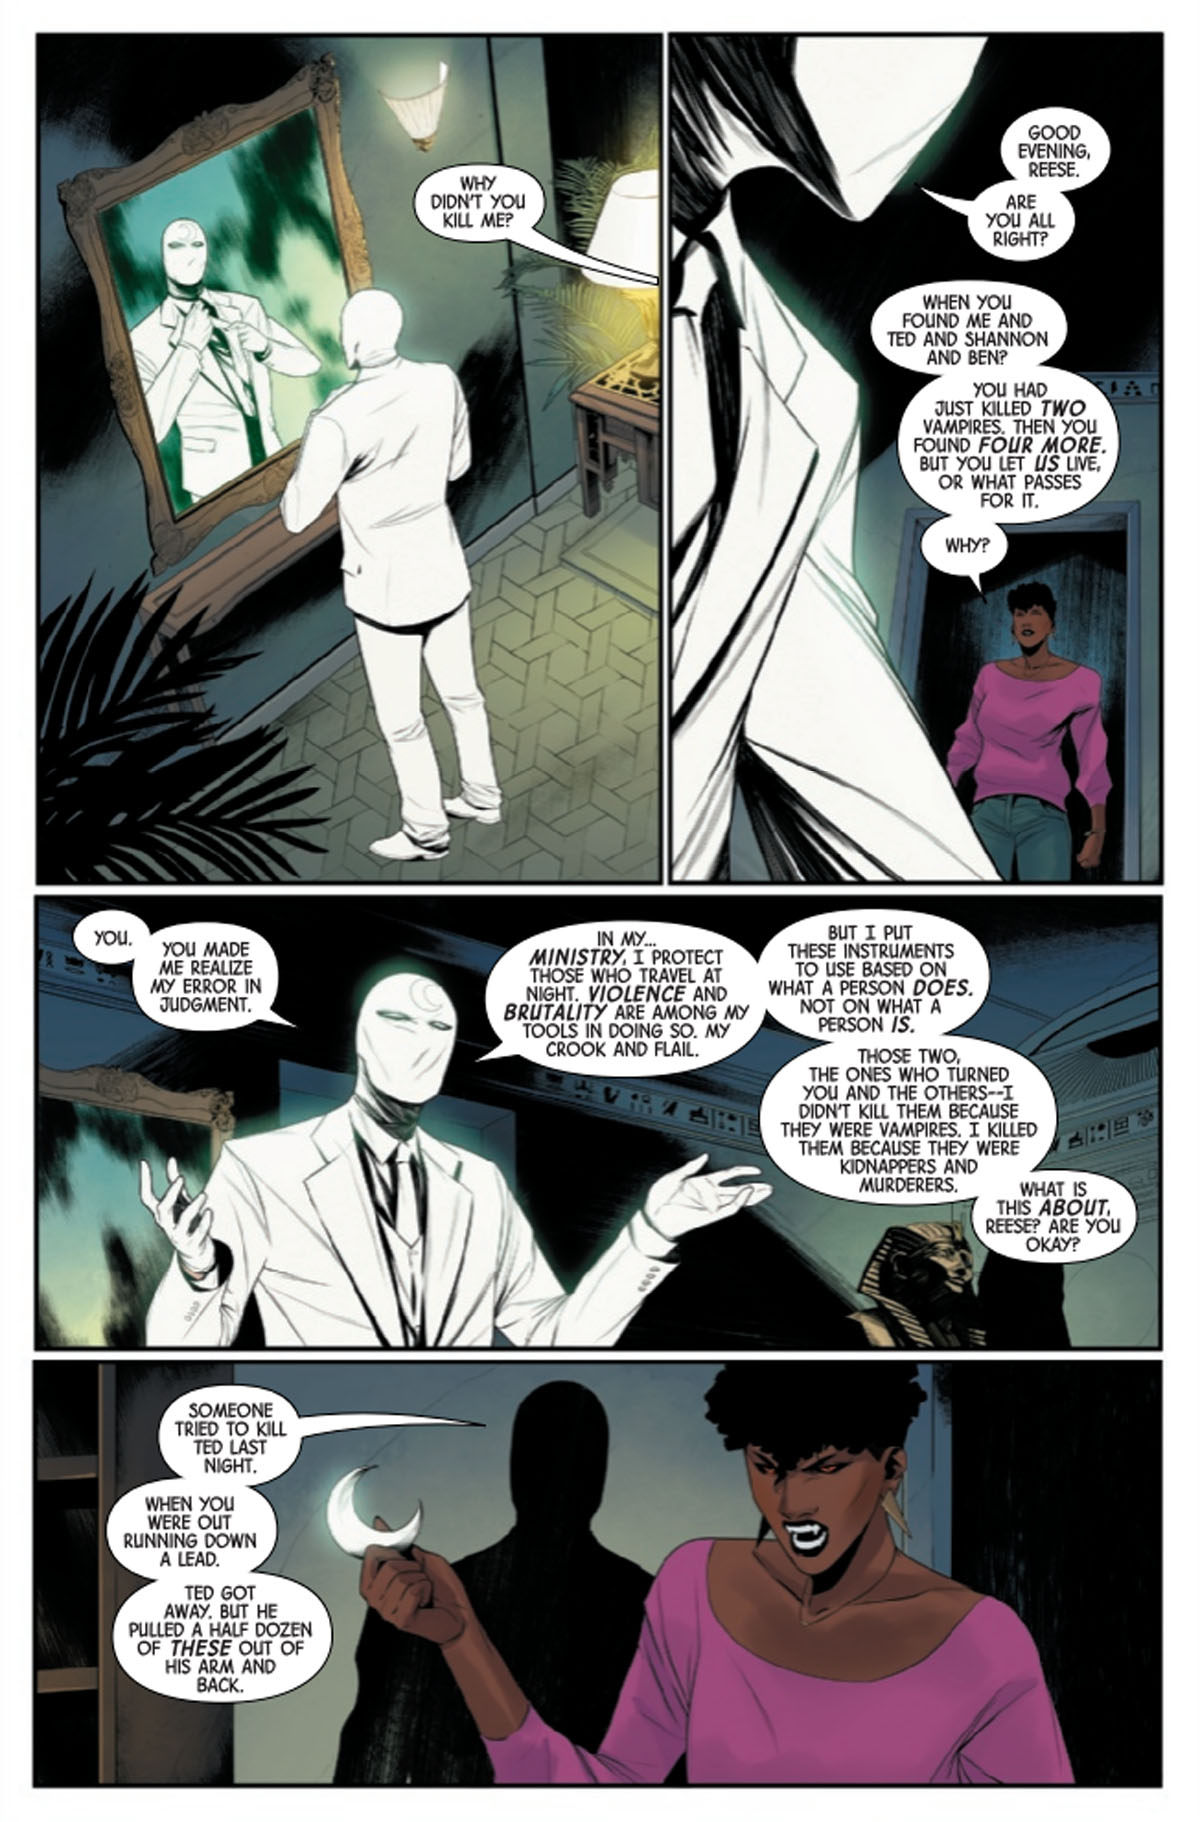 Moon Knight #3 page 3